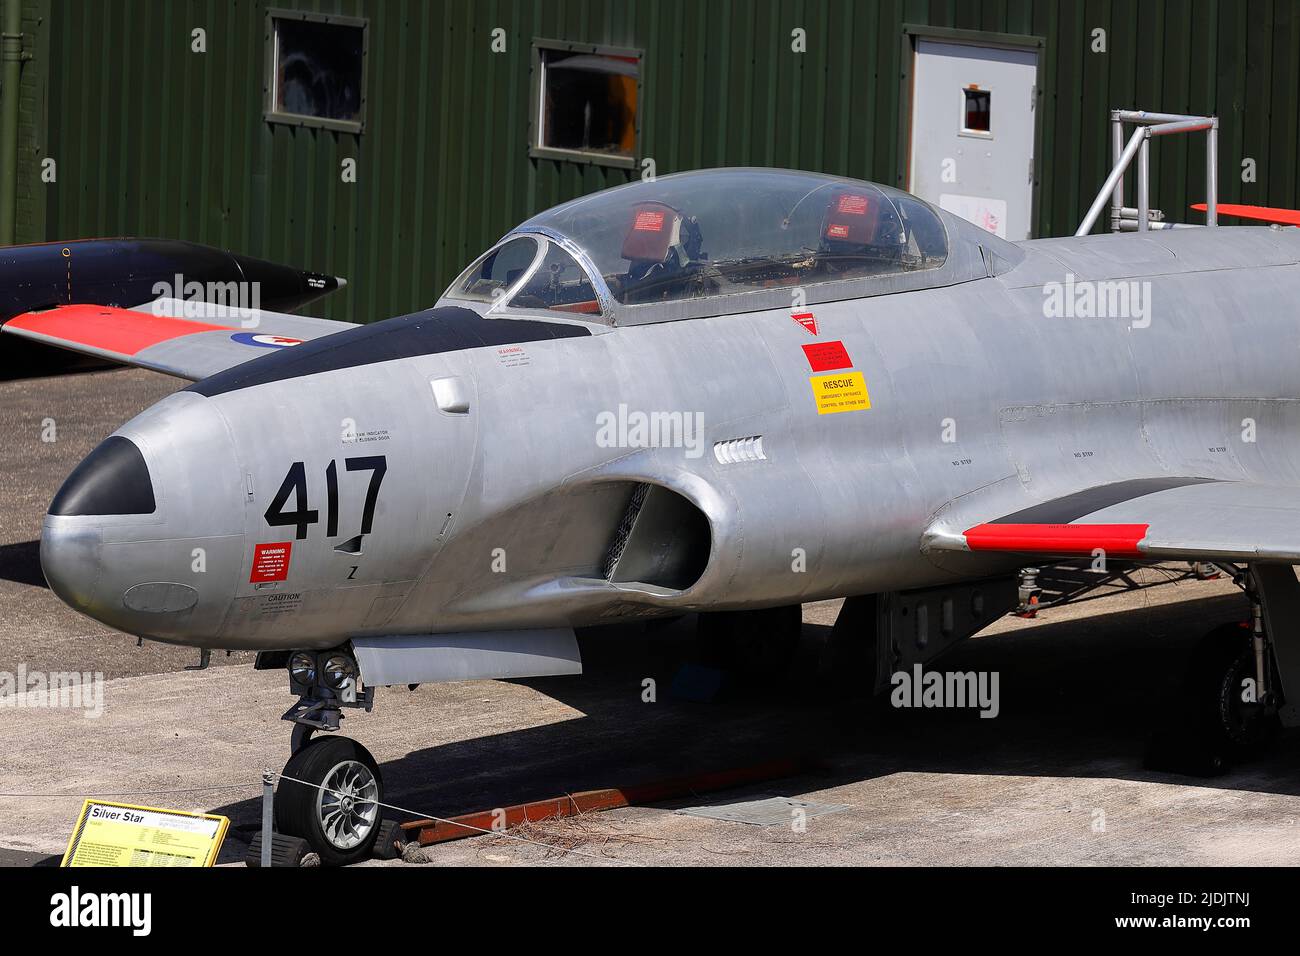 A preserved Canadair Force CT-133 Silver Star on display at Yorkshire Air Museum in Elvingotn,Nort hYorkshire,UK Stock Photo